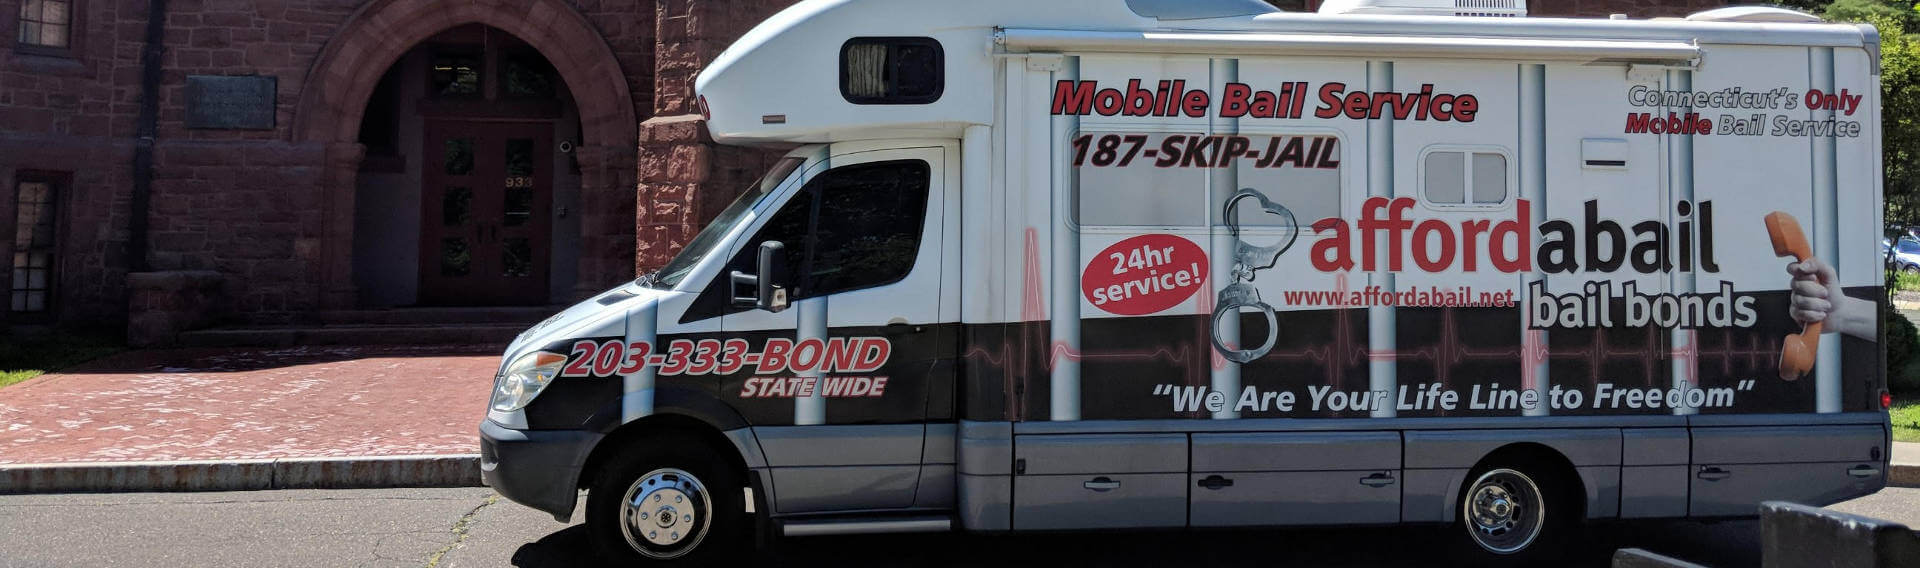 Mobile bail bonds service in New London CT